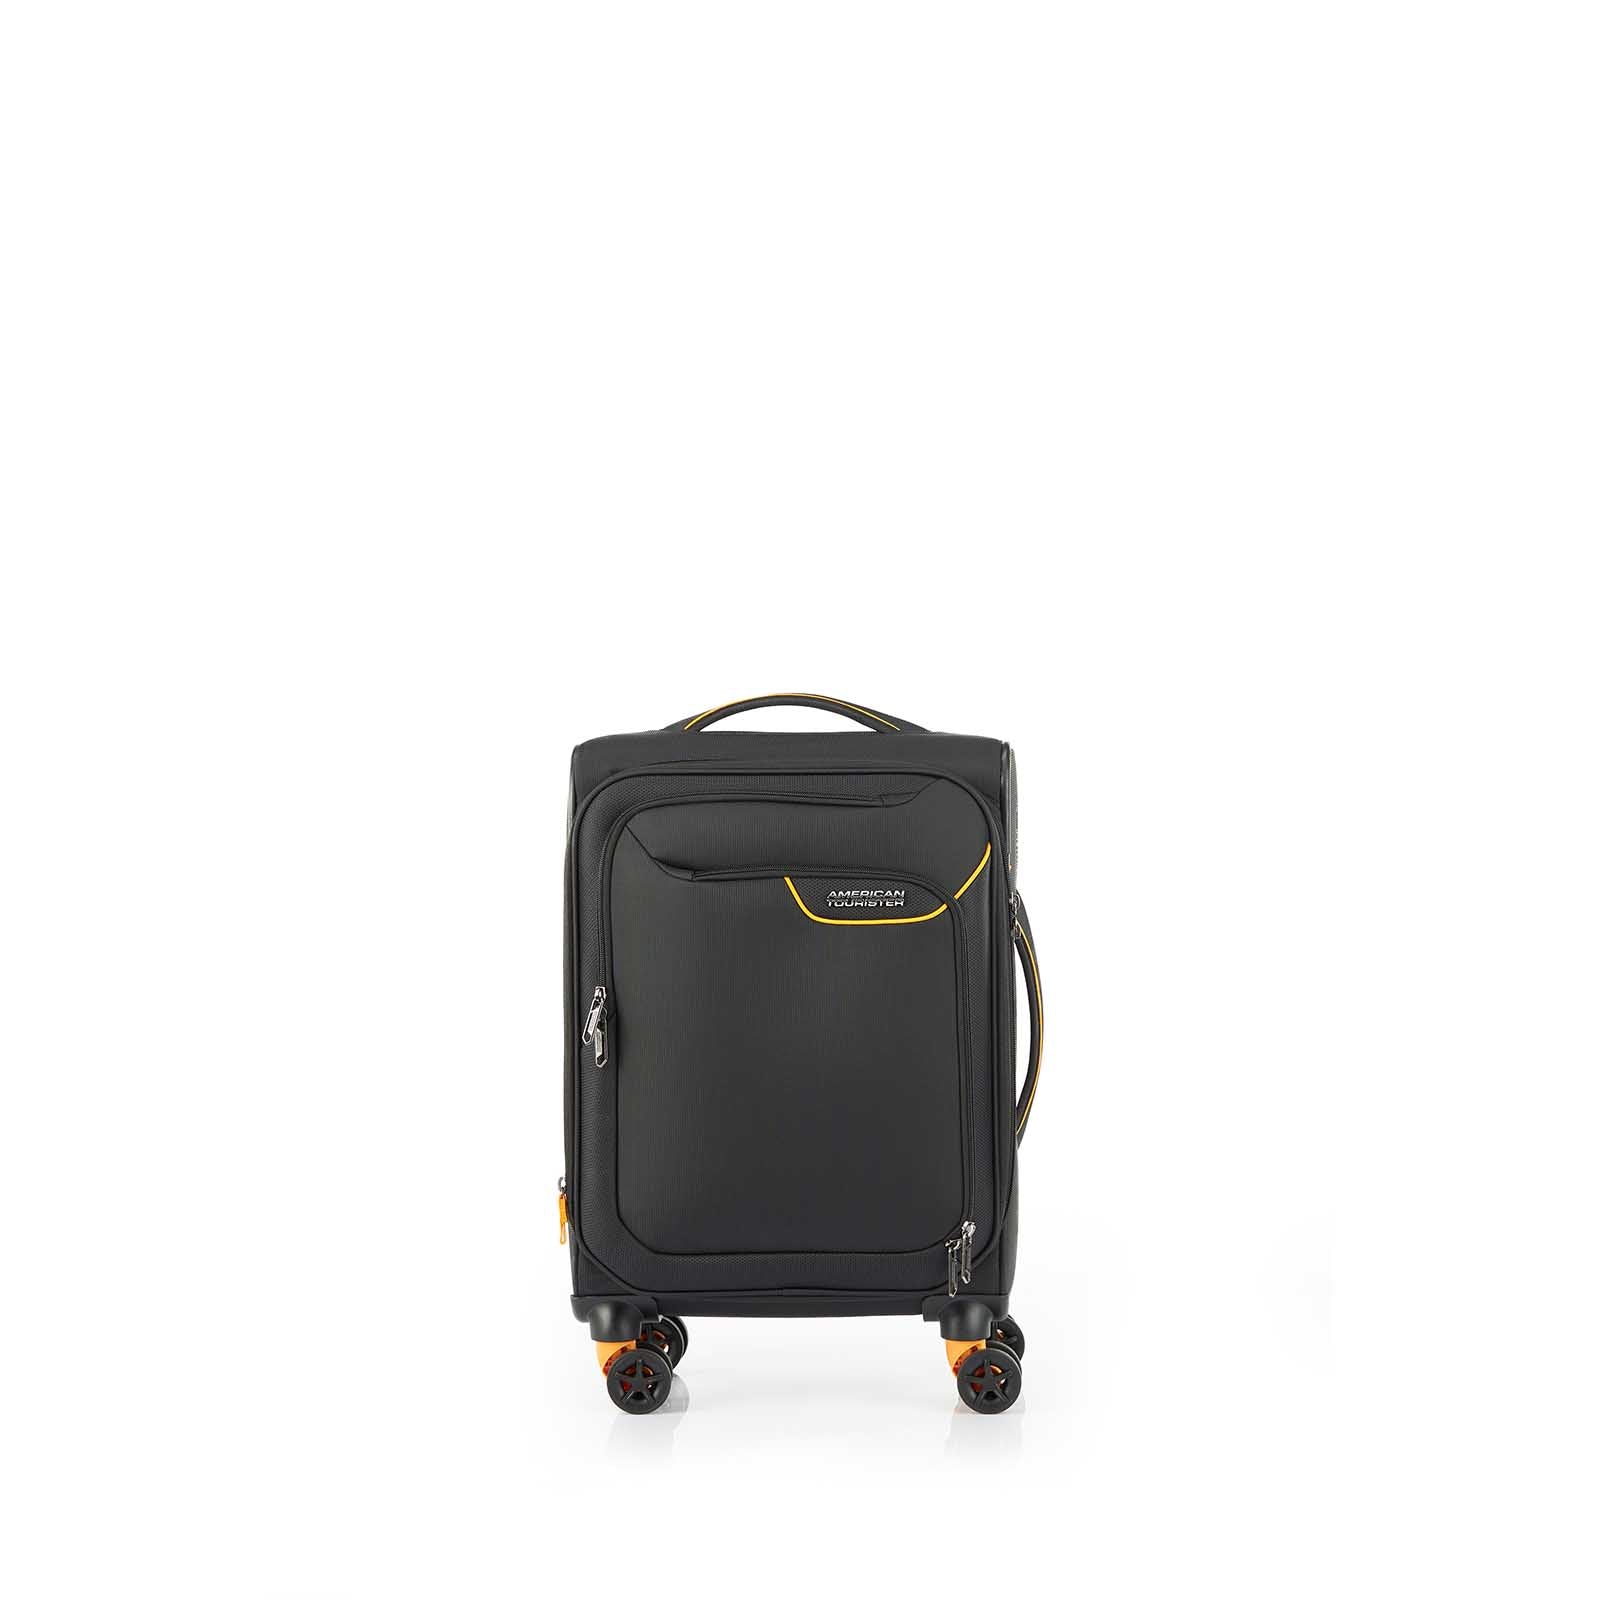 American-Tourister-Applite-4-Eco-55cm-Carry-On-Suitcase-Black-Mustard-Front